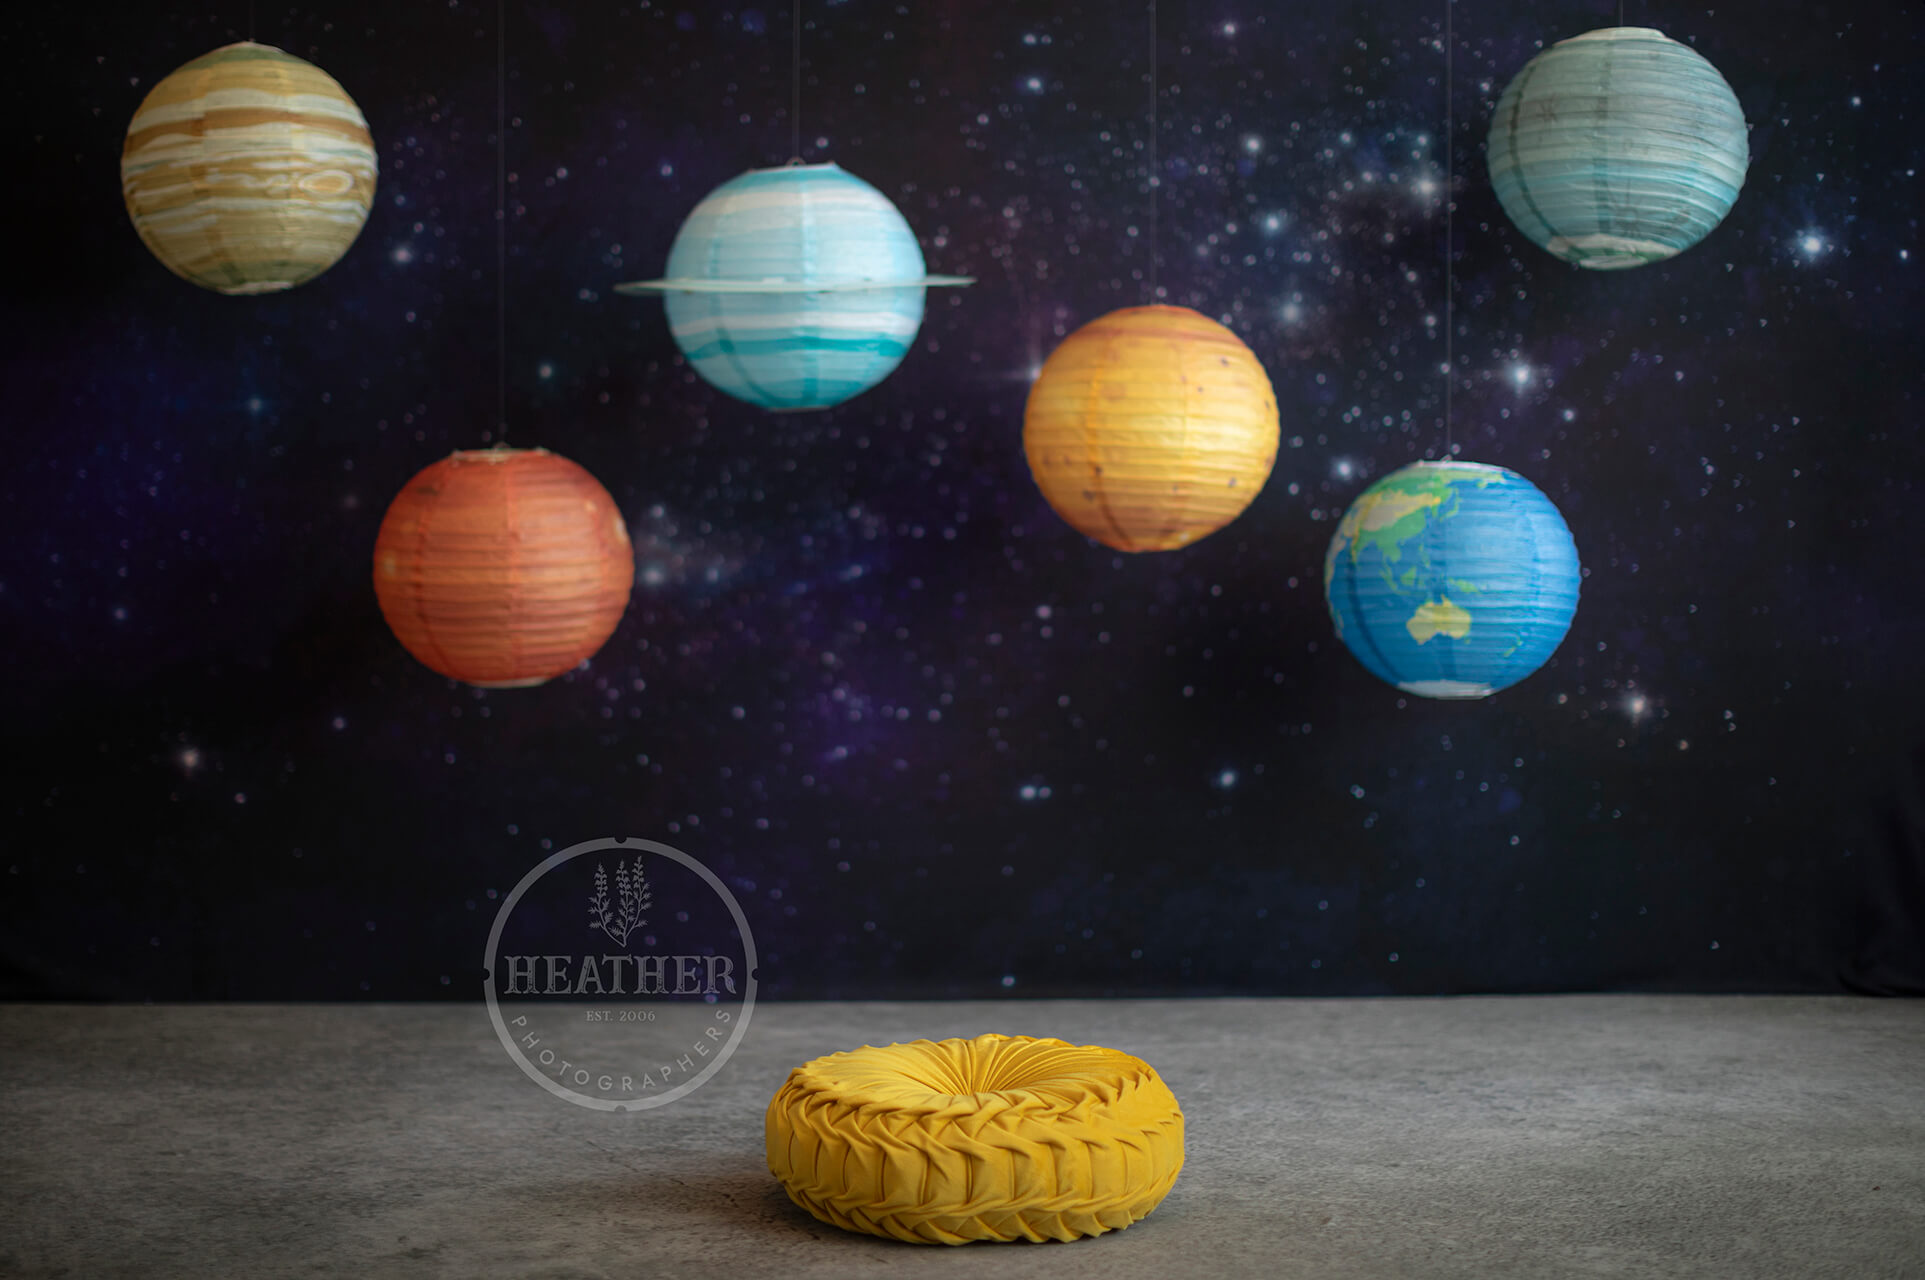 A dramatic backdrop showcasing planets, stars, and galaxies